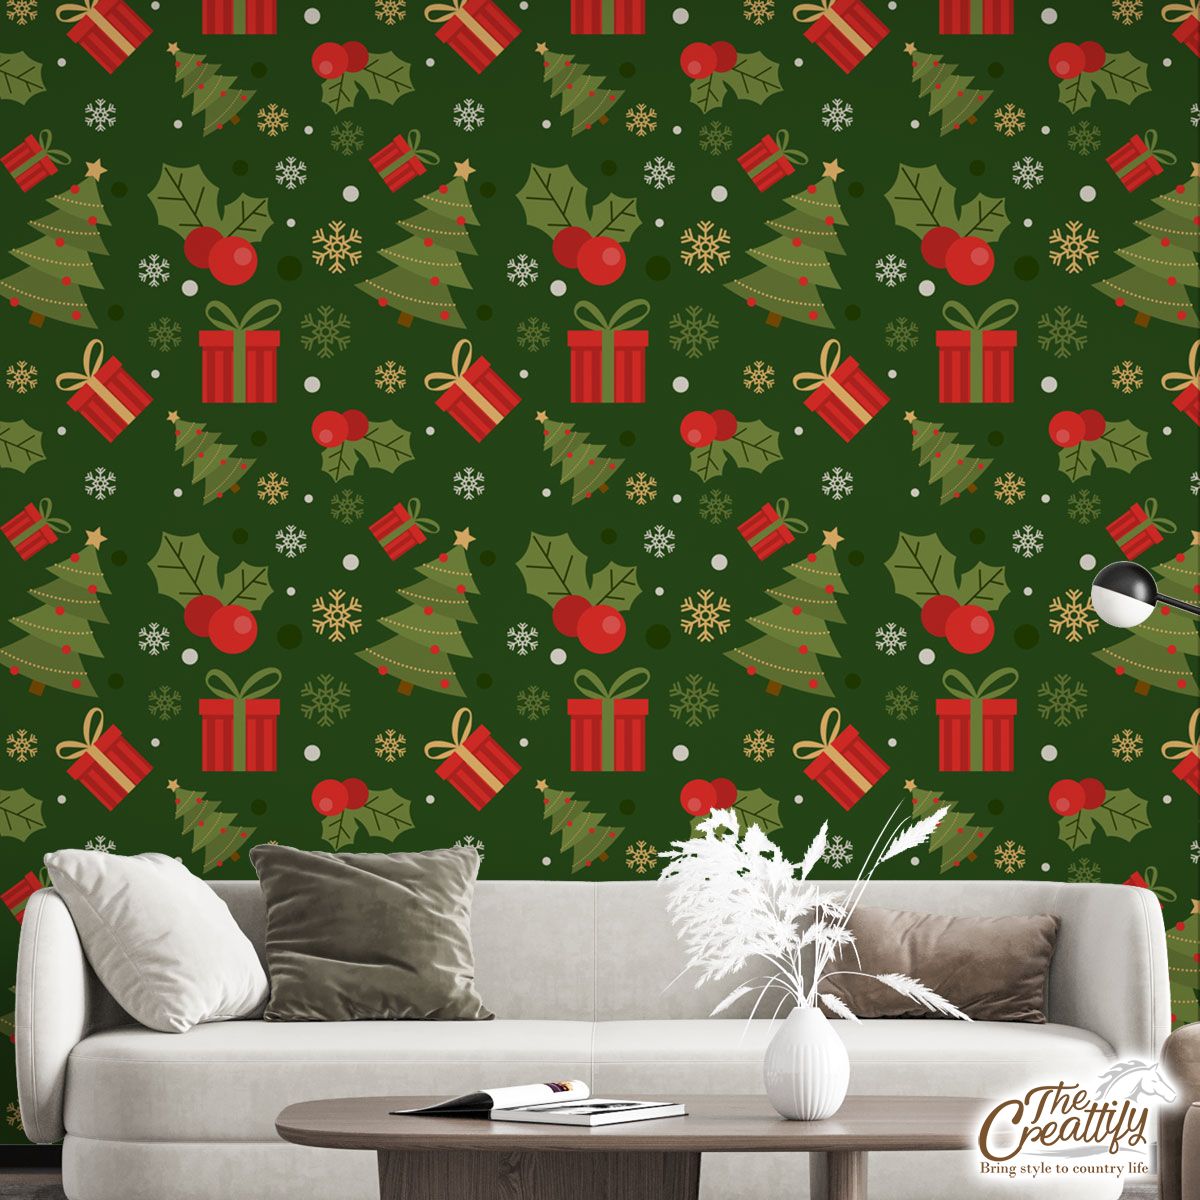 Christmas Tree With Holly Leaf And Presents Wall Mural